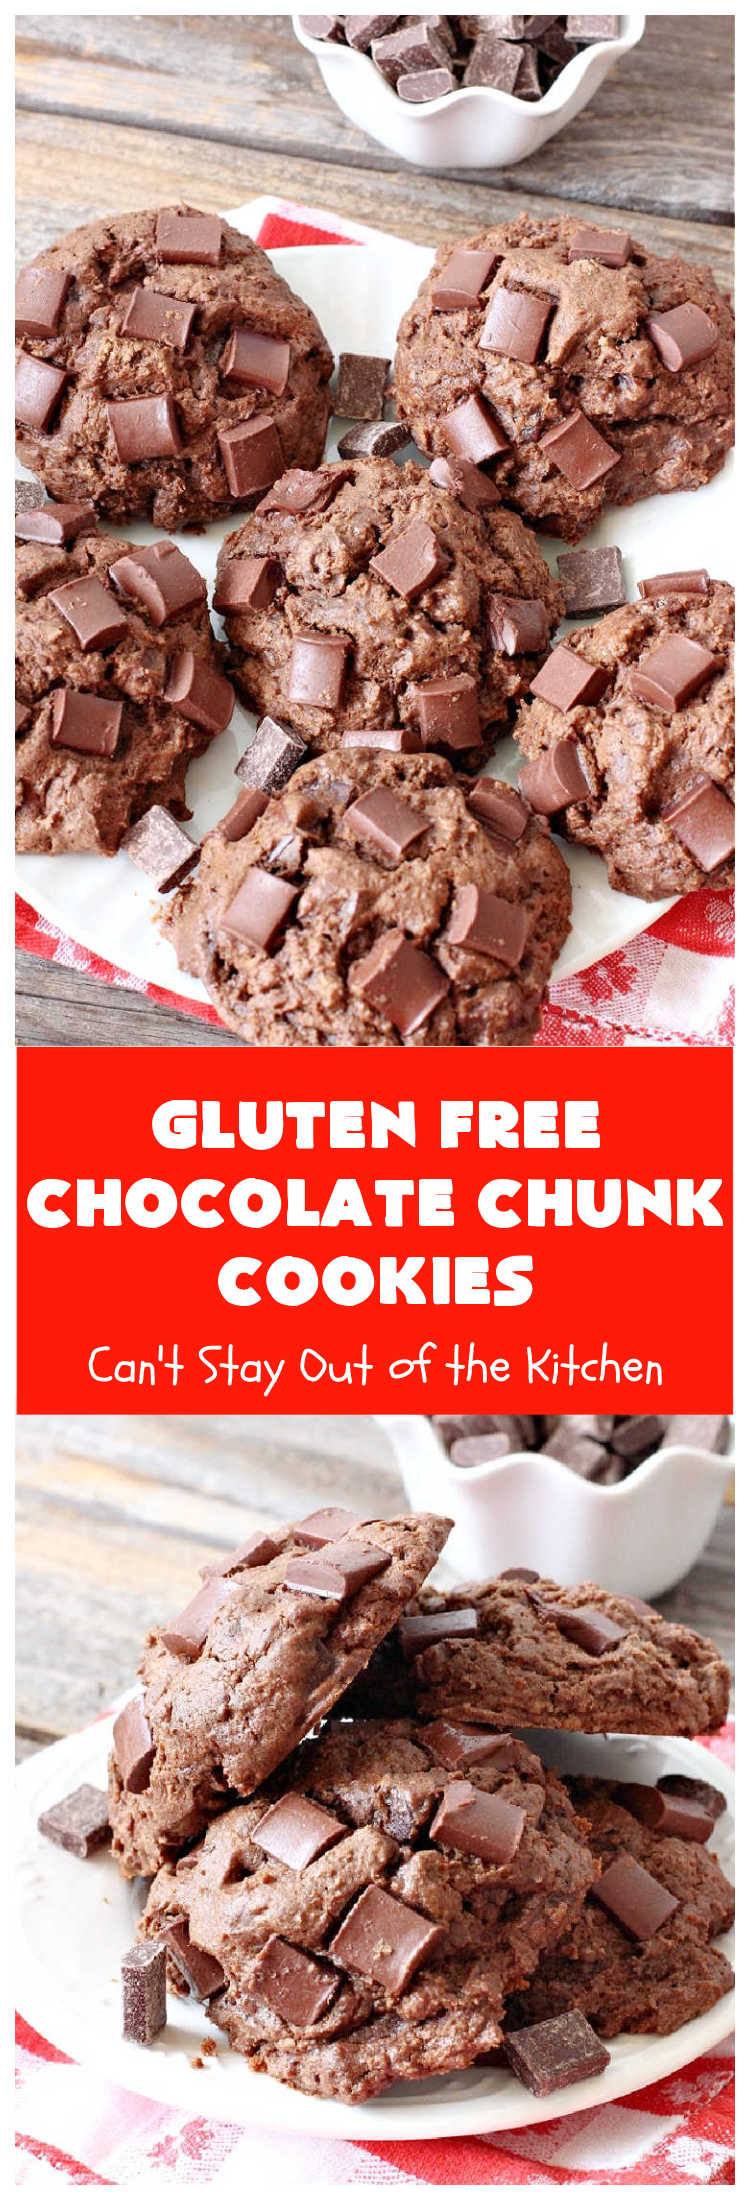 Gluten Free Chocolate Chunk Cookies | Can't Stay Out of the Kitchen | these awesome #cookies are the perfect #dessert for #MemorialDay, #FourthOfJuly, #LaborDay, backyard barbecues or other summer fun. So delicious you won't believe you're eating #GlutenFree #chocolate #tailgating #ChocolateDessert #GlutenFreeDessert #GlutenFreeChocolateChunkCookies